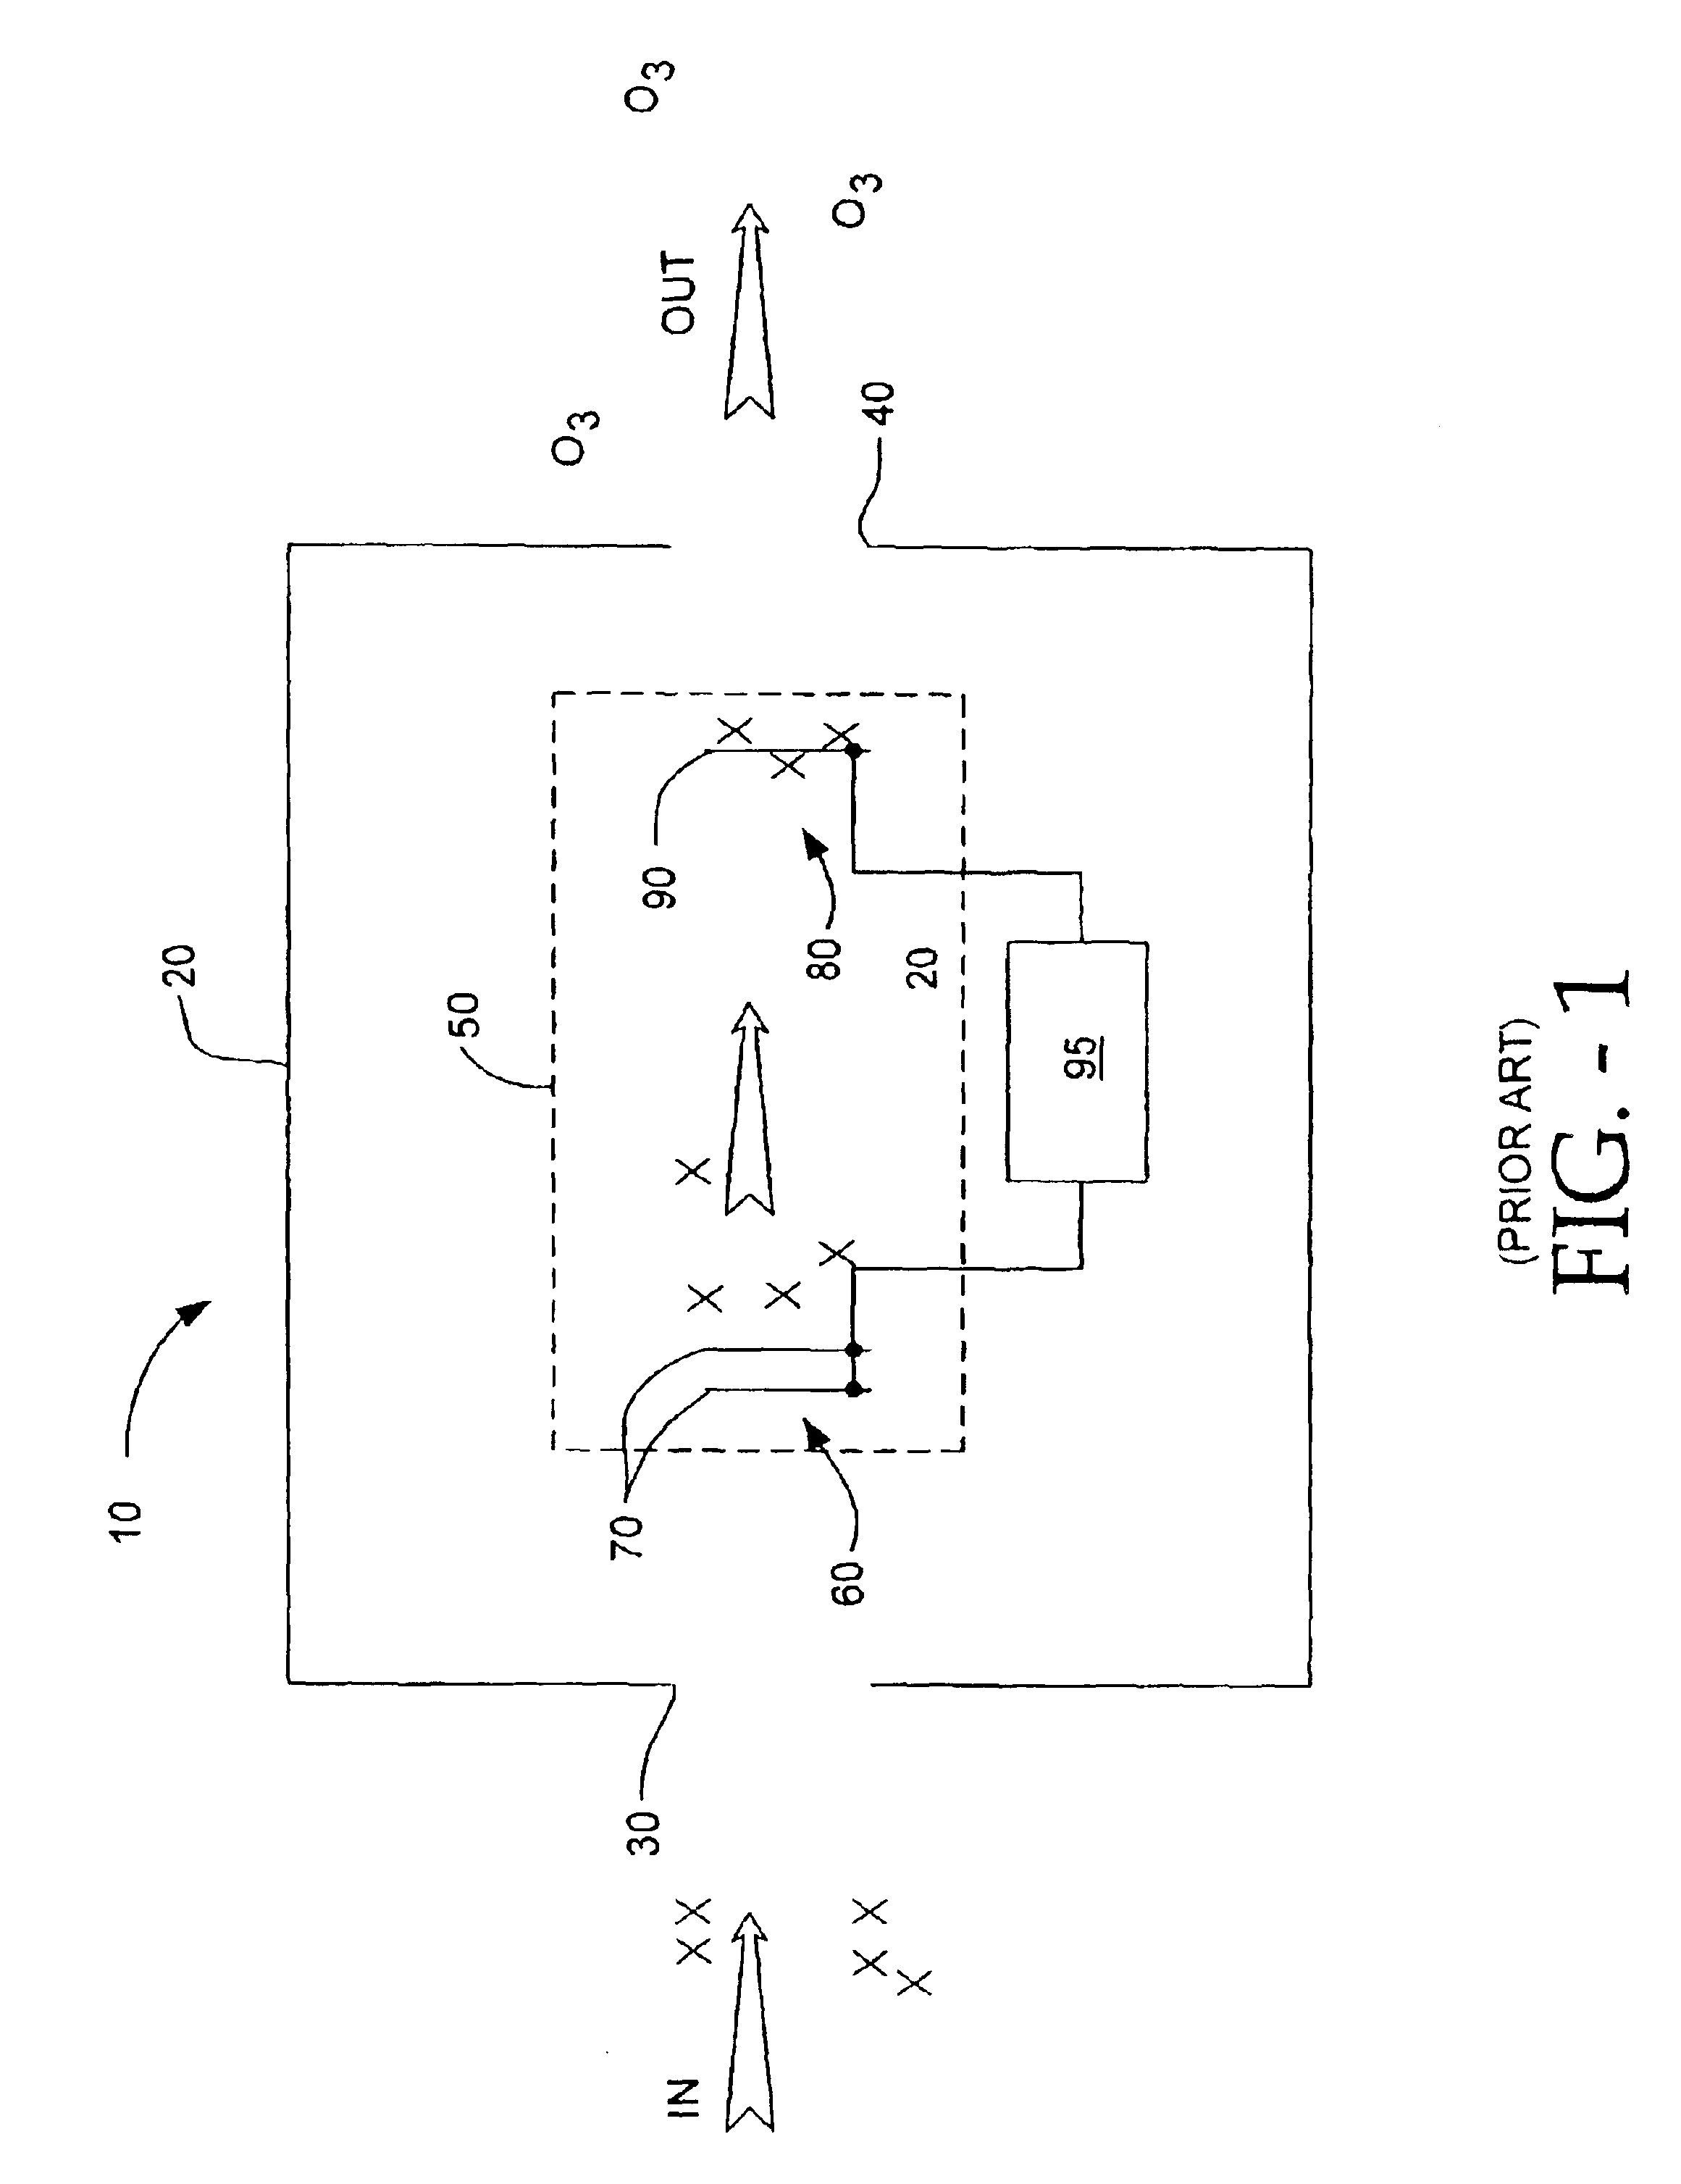 Electro-kinetic air transporter and conditioner device with enhanced housing configuration and enhanced anti-microorganism capability